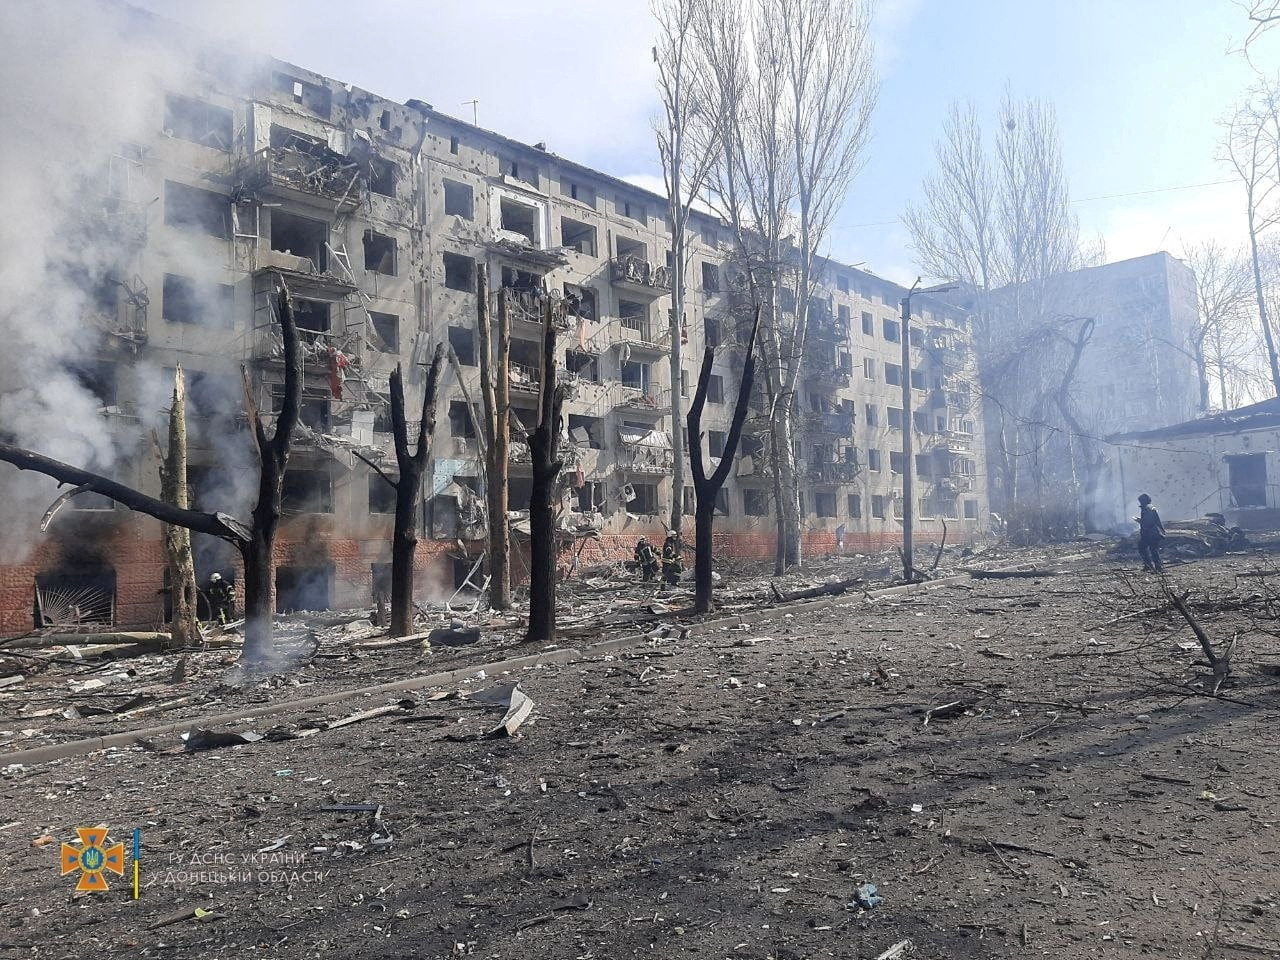 A view shows buildings damaged by shelling in Kramatorsk